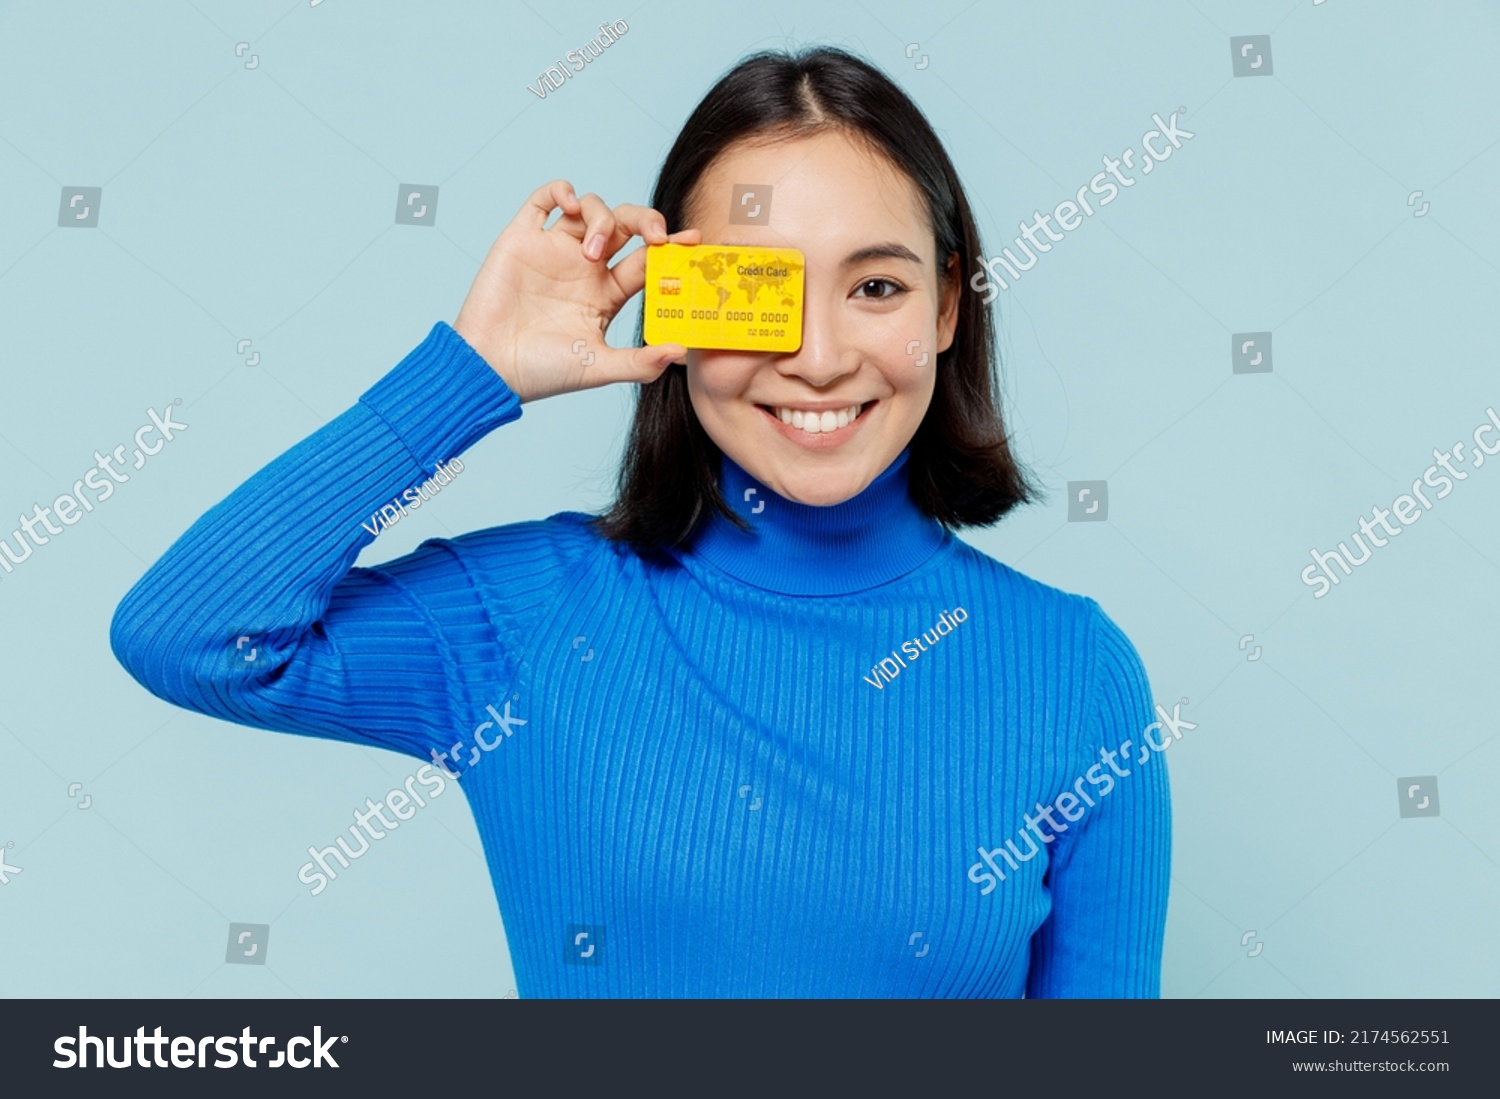 Fascinating fun joyful young woman of Asian ethnicity 20s years old wears blue shirt hold in hand credit bank card cover close hiding eye isolated on plain pastel light blue background studio portrait #2174562551